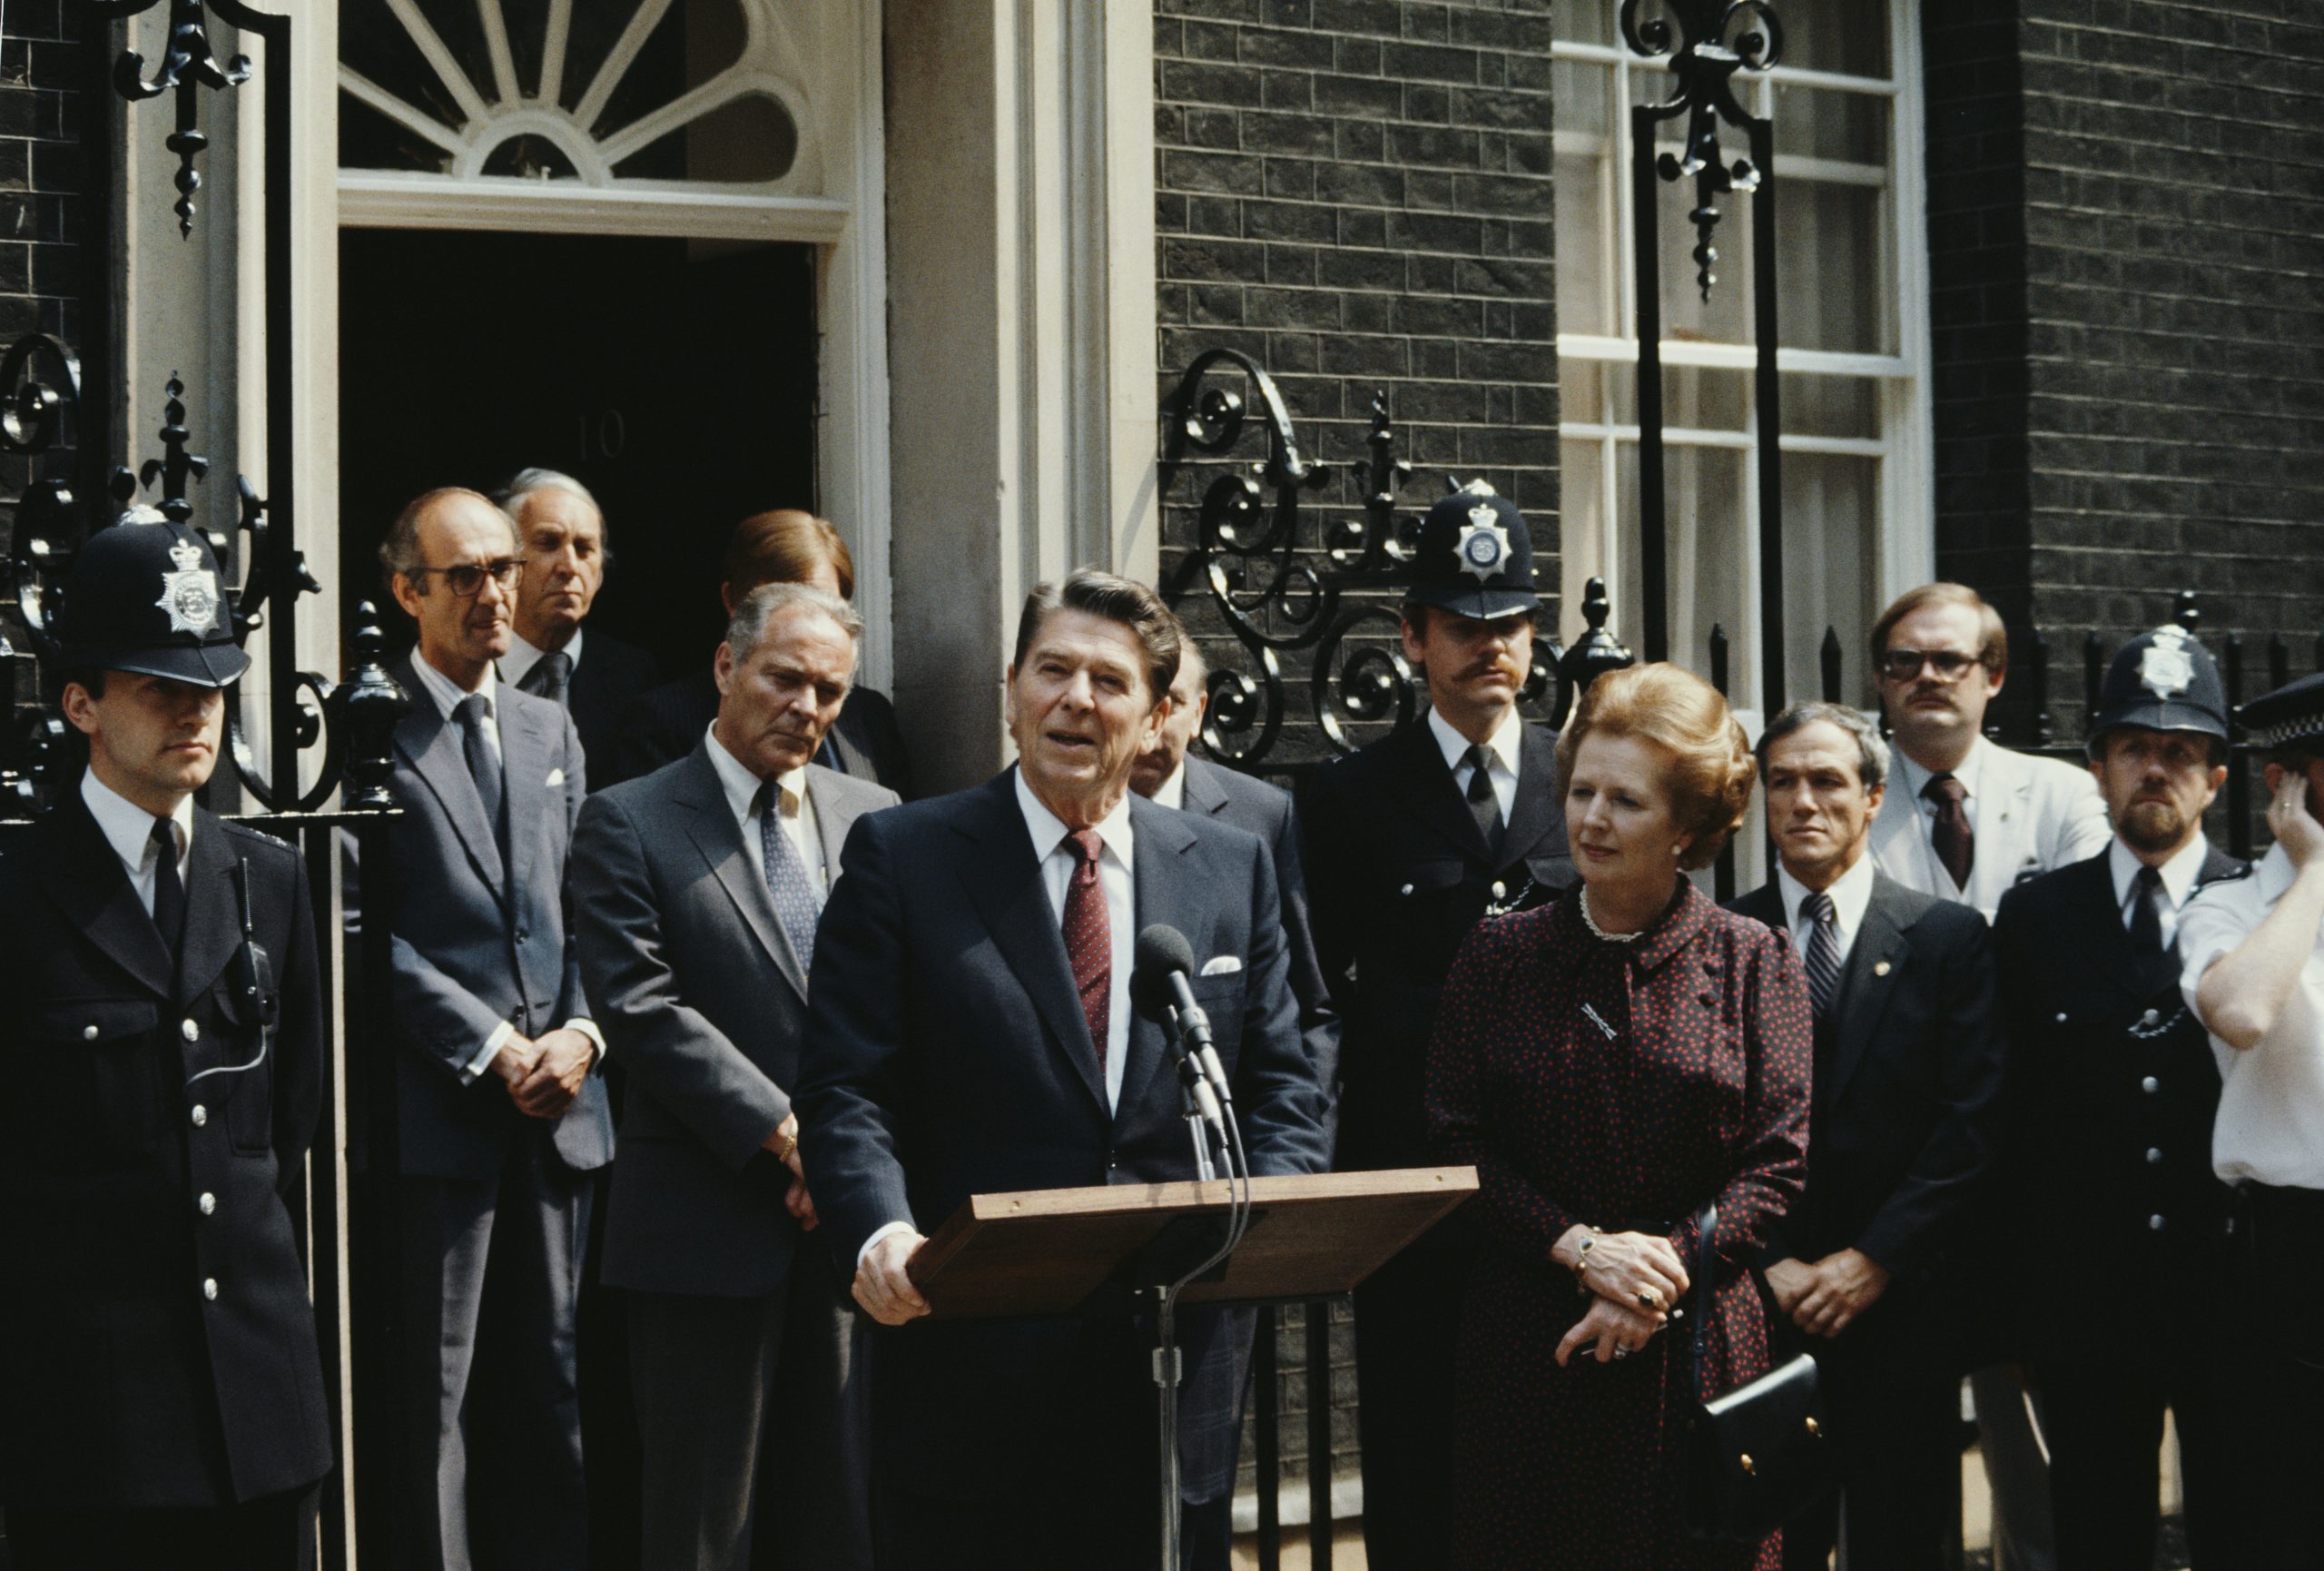 US President Ronald Reagan makes a speech outside 10 Downing Street, 9 June 1982. During this visit, Reagan outlined his vision for the National Endowment for Democracy